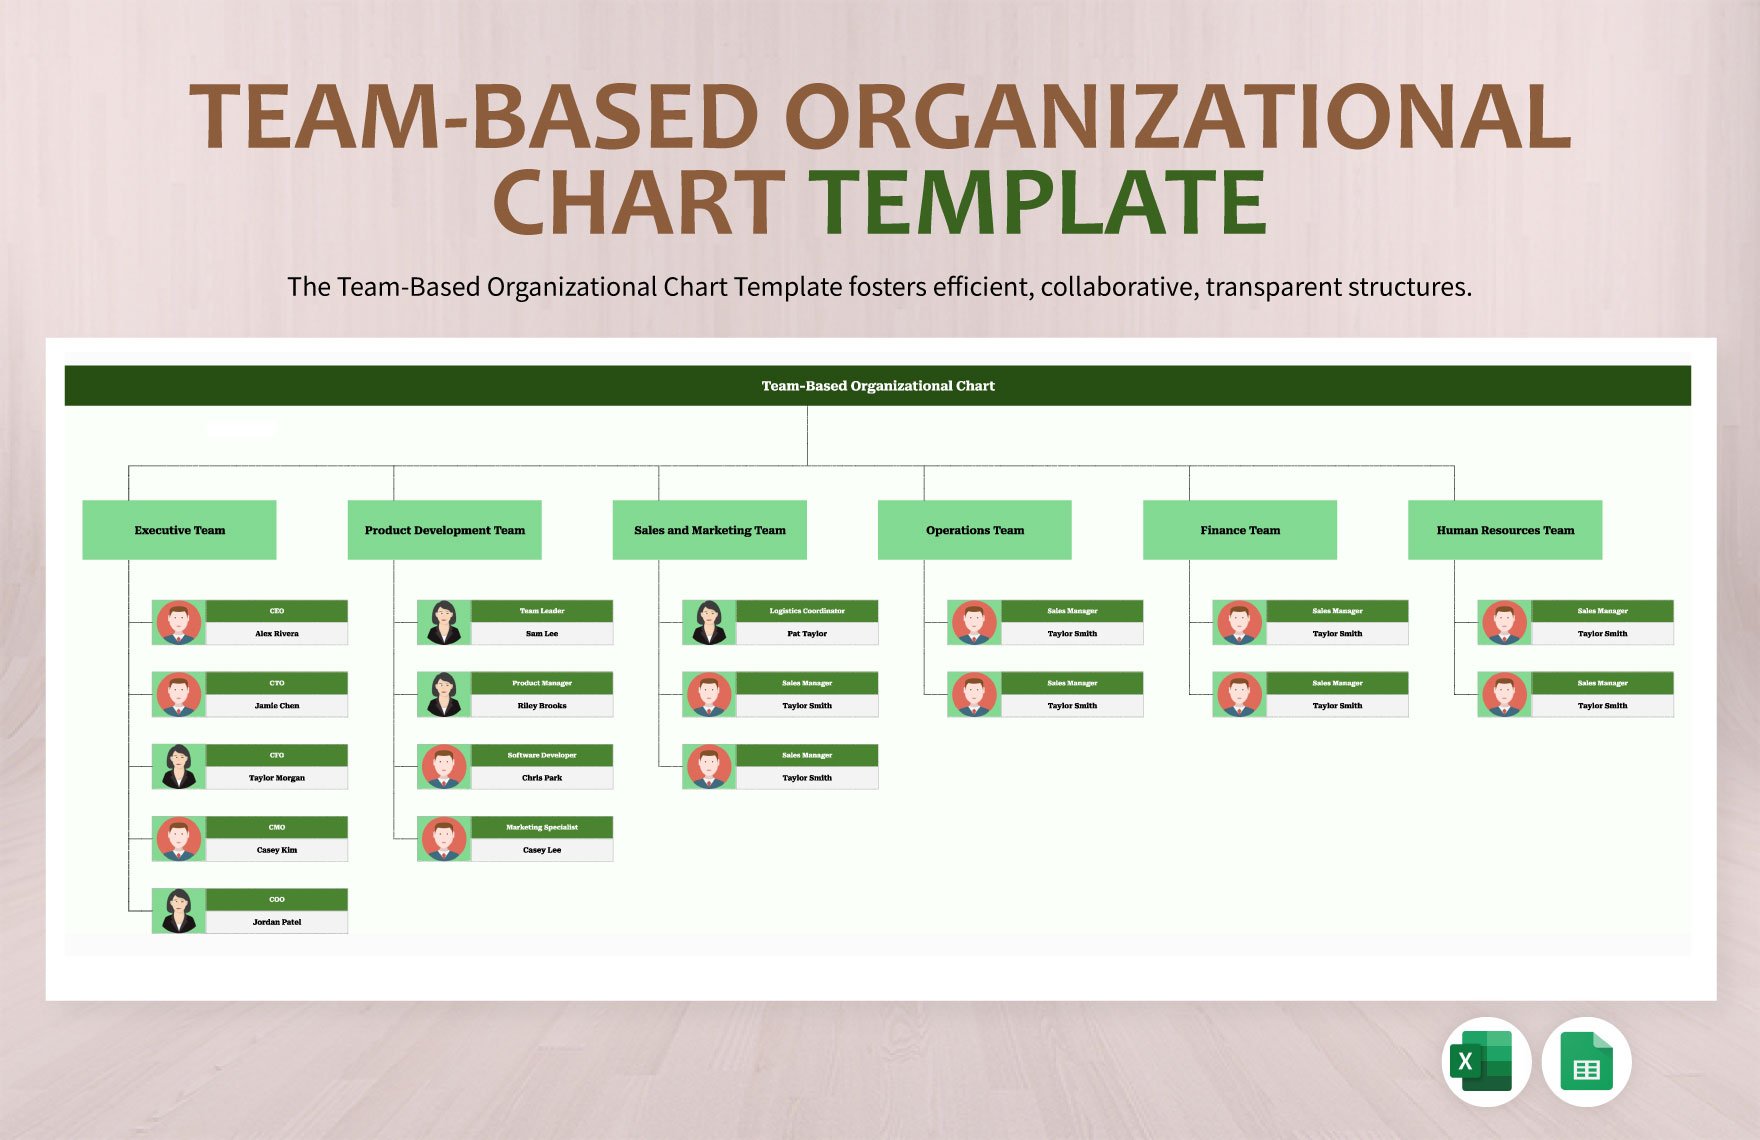 Team-Based Organizational Chart Template in Excel, Google Sheets